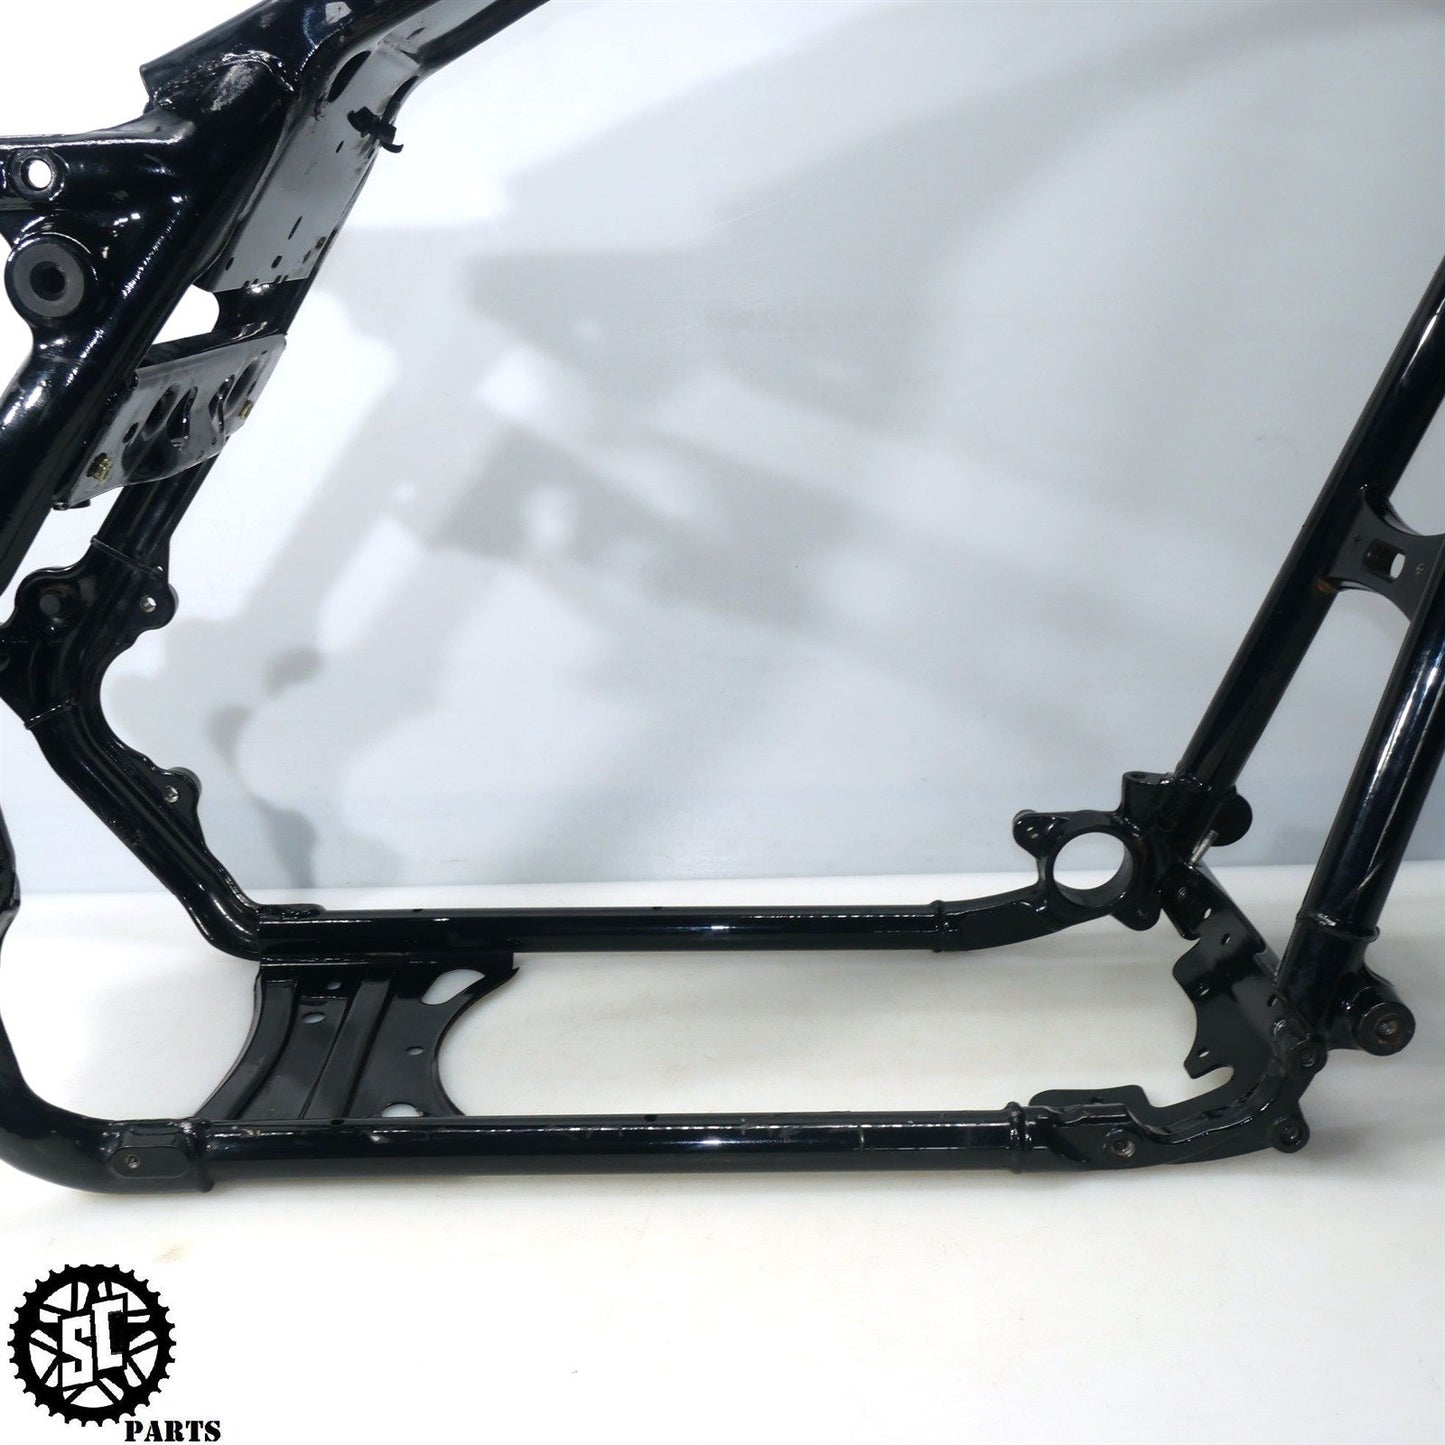 2015 HARLEY DAVIDSON ULTRA TOURING FRAME CHASSIS *S* HD45